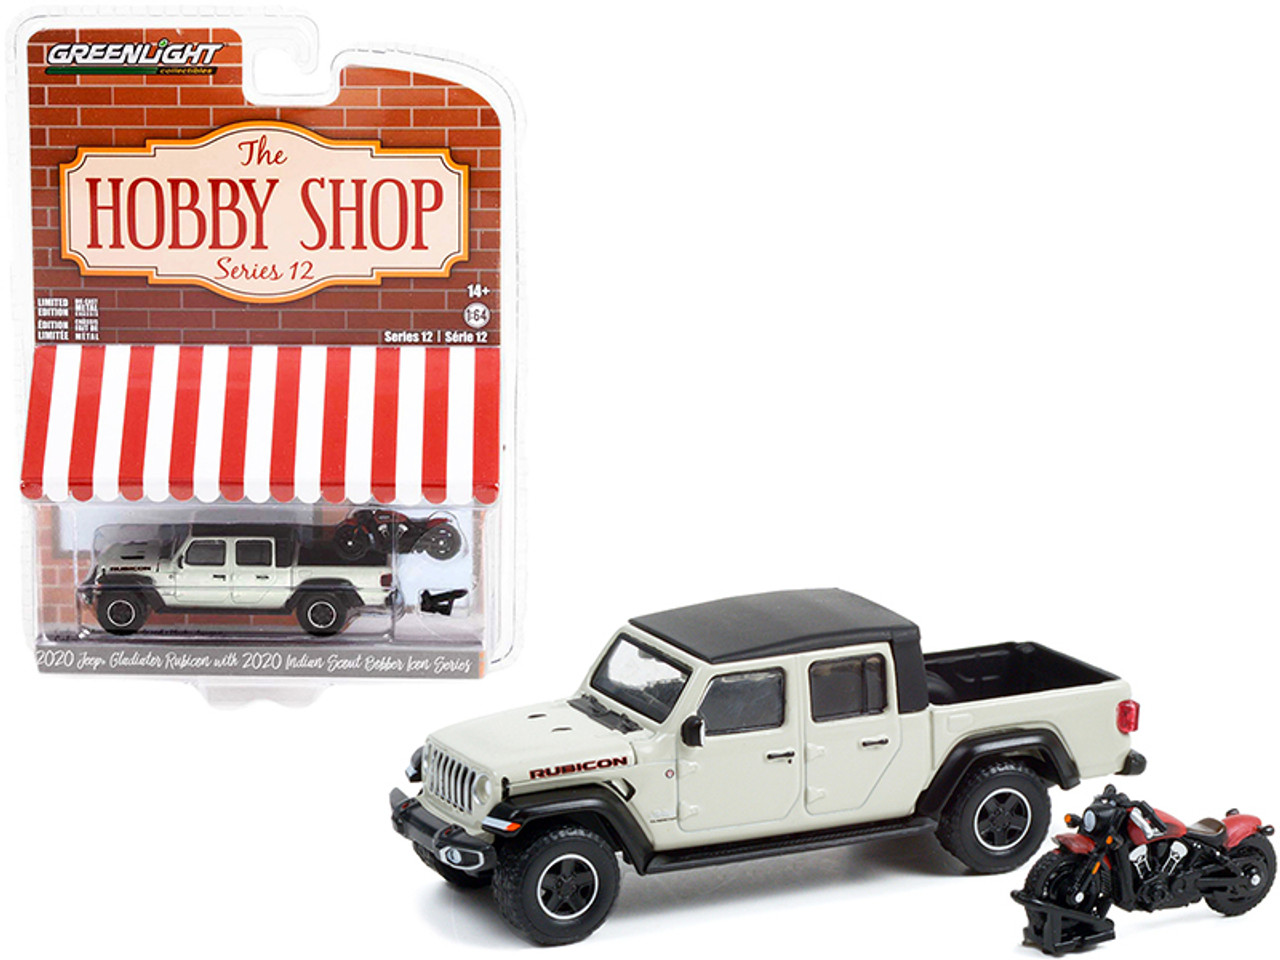 2020 Jeep Gladiator Rubicon Pickup Truck Beige with Black Top and 2020 Indian Scout Bobber Icon Series Motorcycle Red "The Hobby Shop" Series 12 1/64 Diecast Model Car by Greenlight